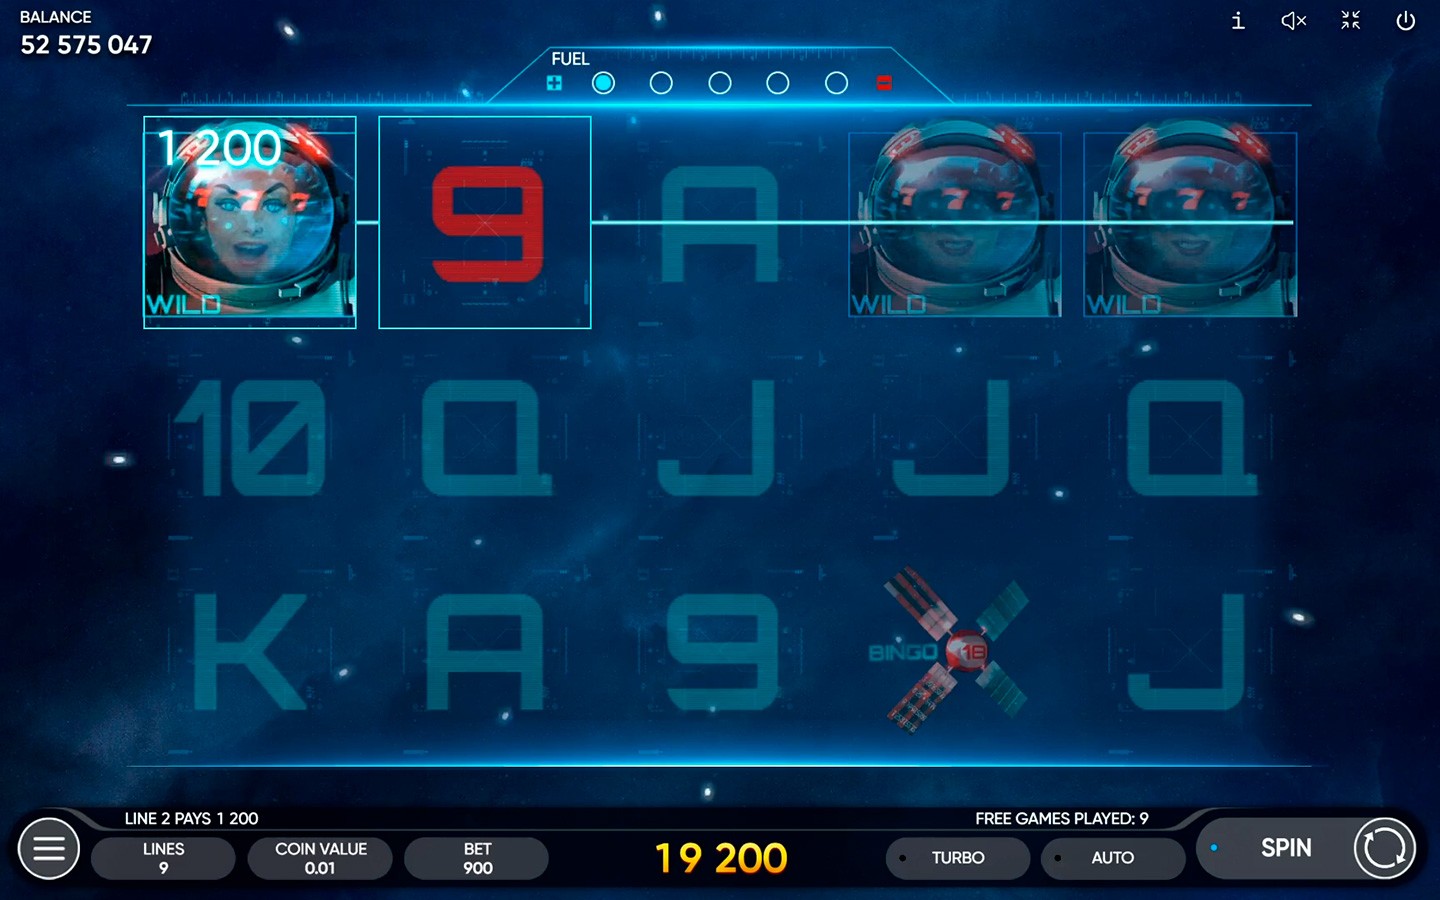 BEST 2021 SPACE SLOTS | Play 2027 ISS GAME Online!